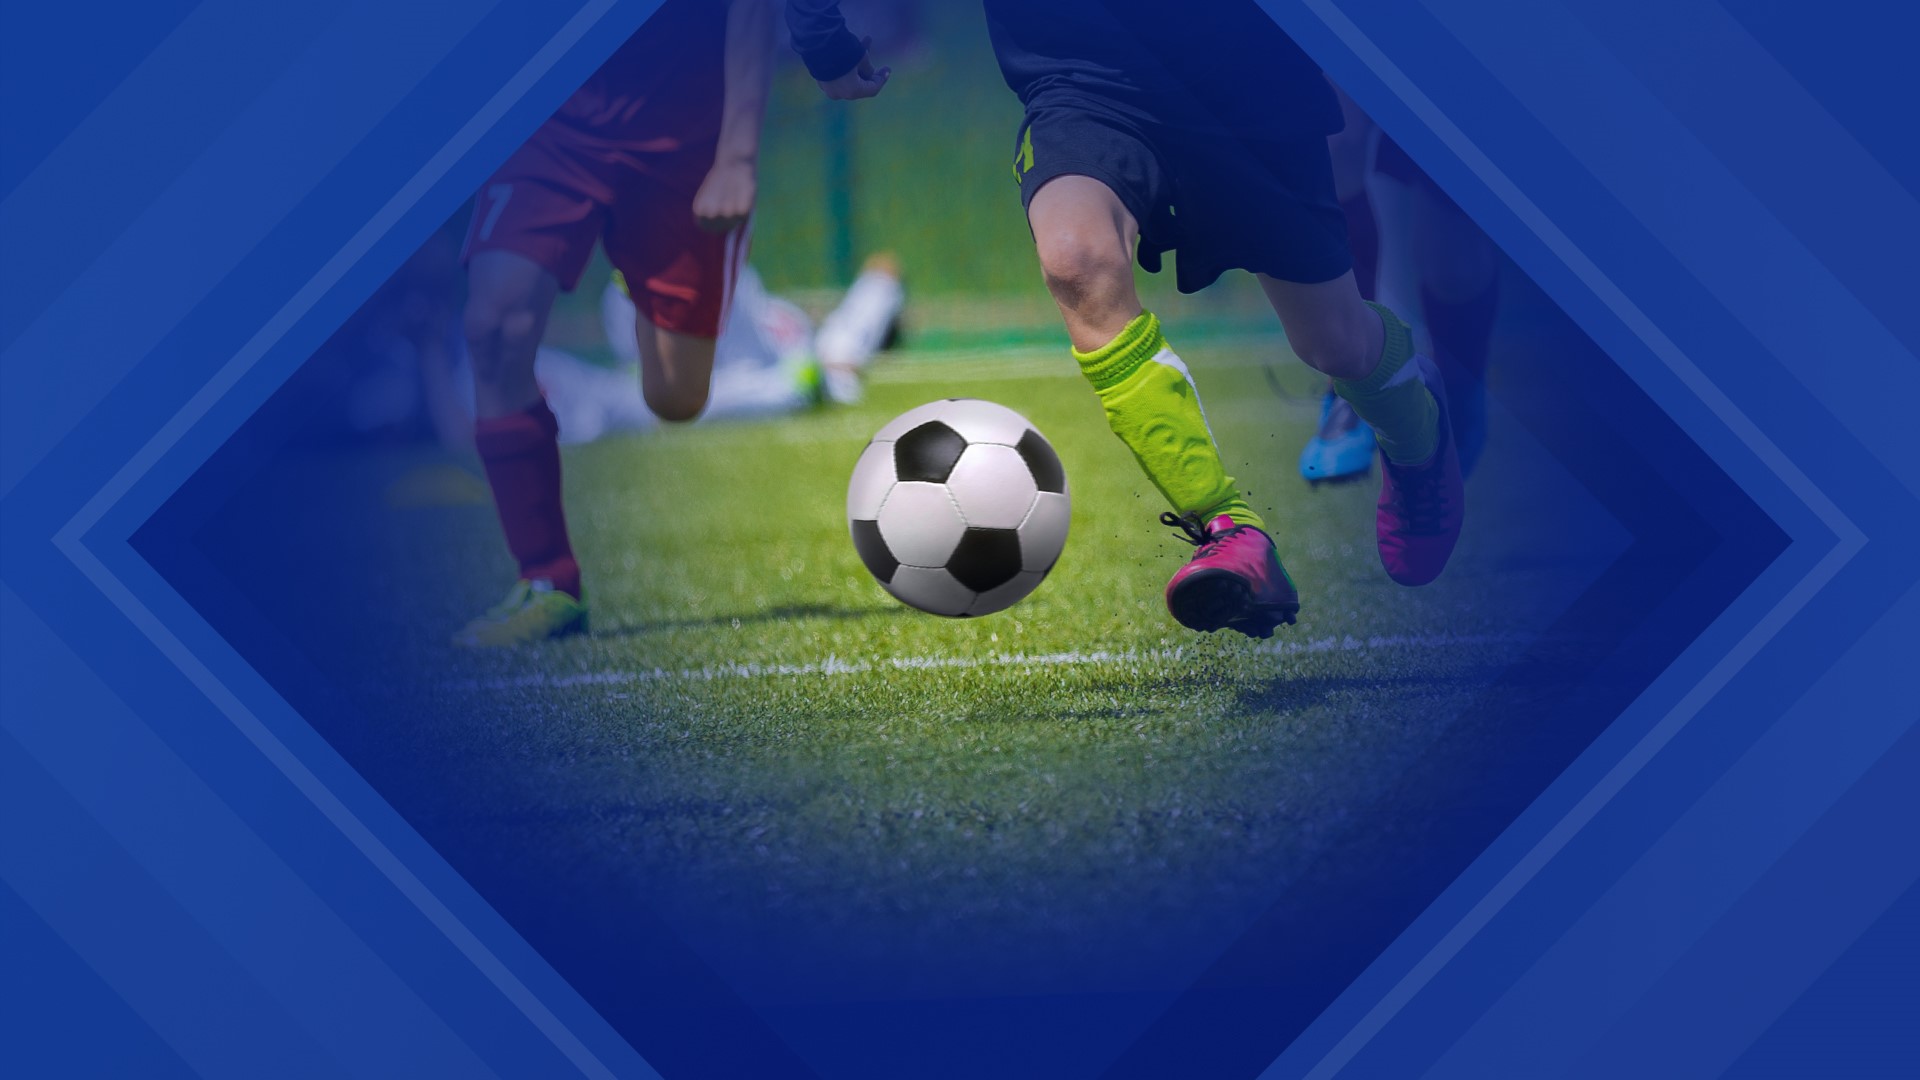 The Shenandoah Valley School Board voted unanimously to approve a soccer program after rejecting the idea several times.